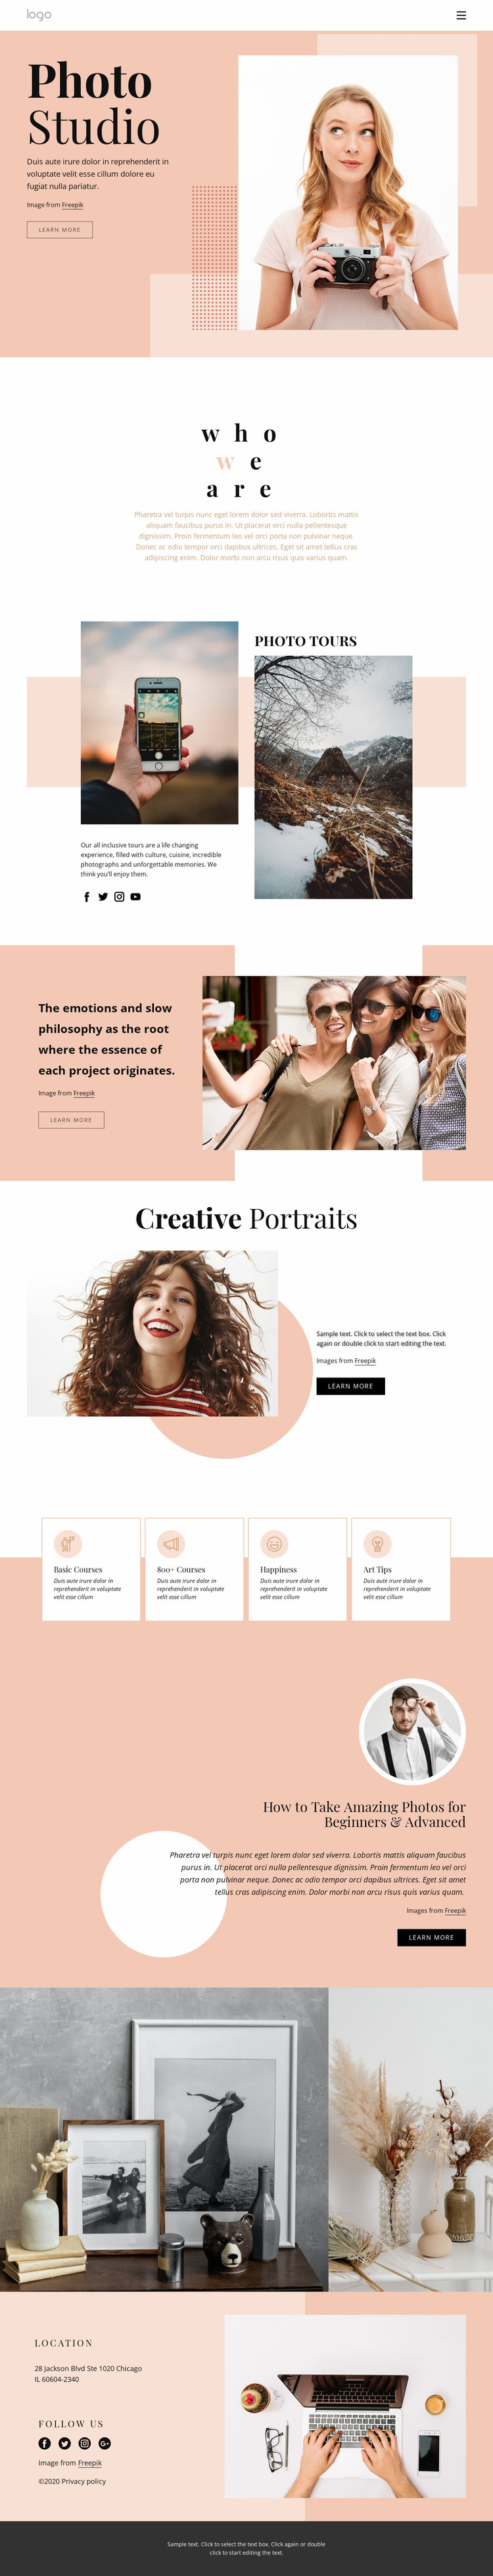 Photography courses Website Mockup